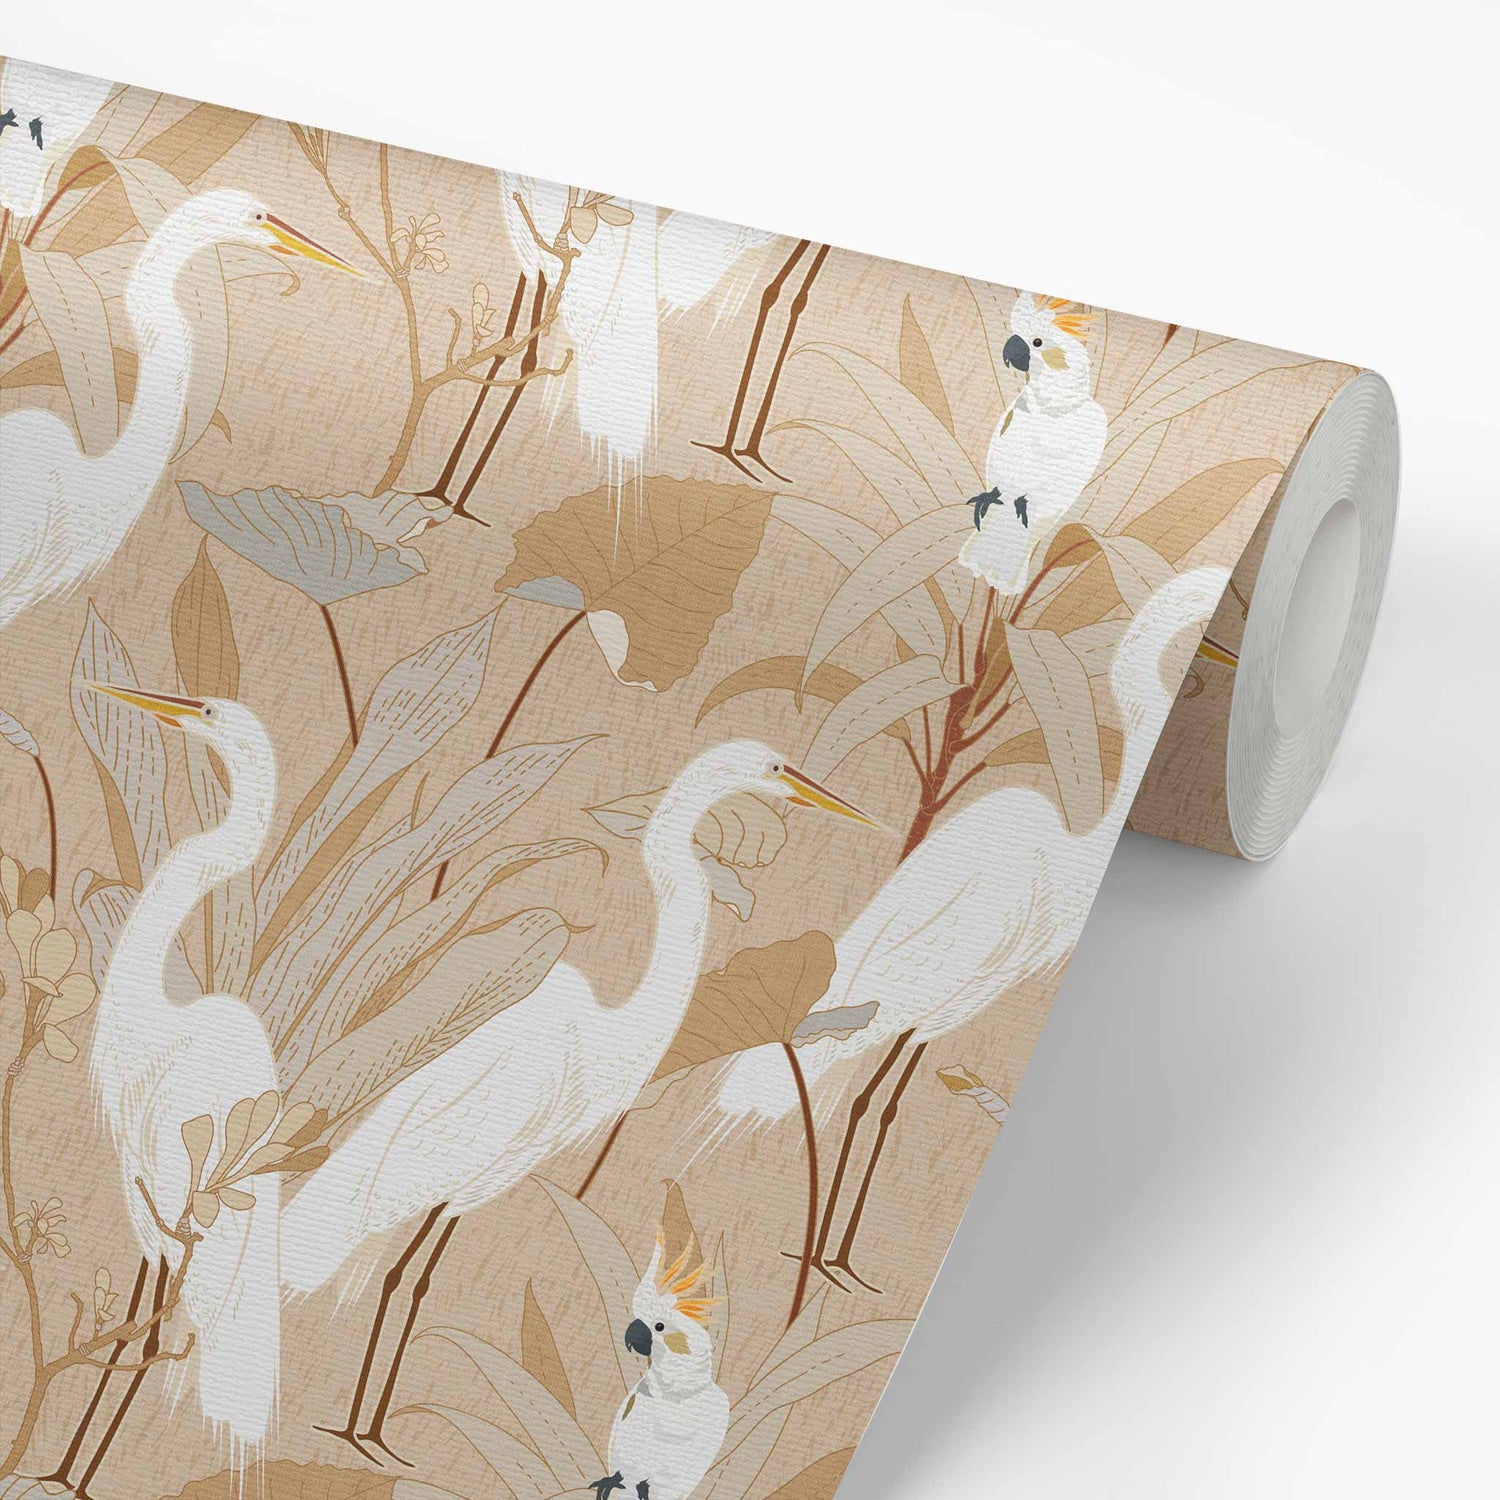 Designed with an eye-catching flair of animals and class, Cranes and Cockatoo Wallpaper - Tan encaptures tasteful luxury. This exclusive wallpaper features a sophisticated design of cranes and cockatoos, perfect for bringing a sense of refinement and elegance to your home.